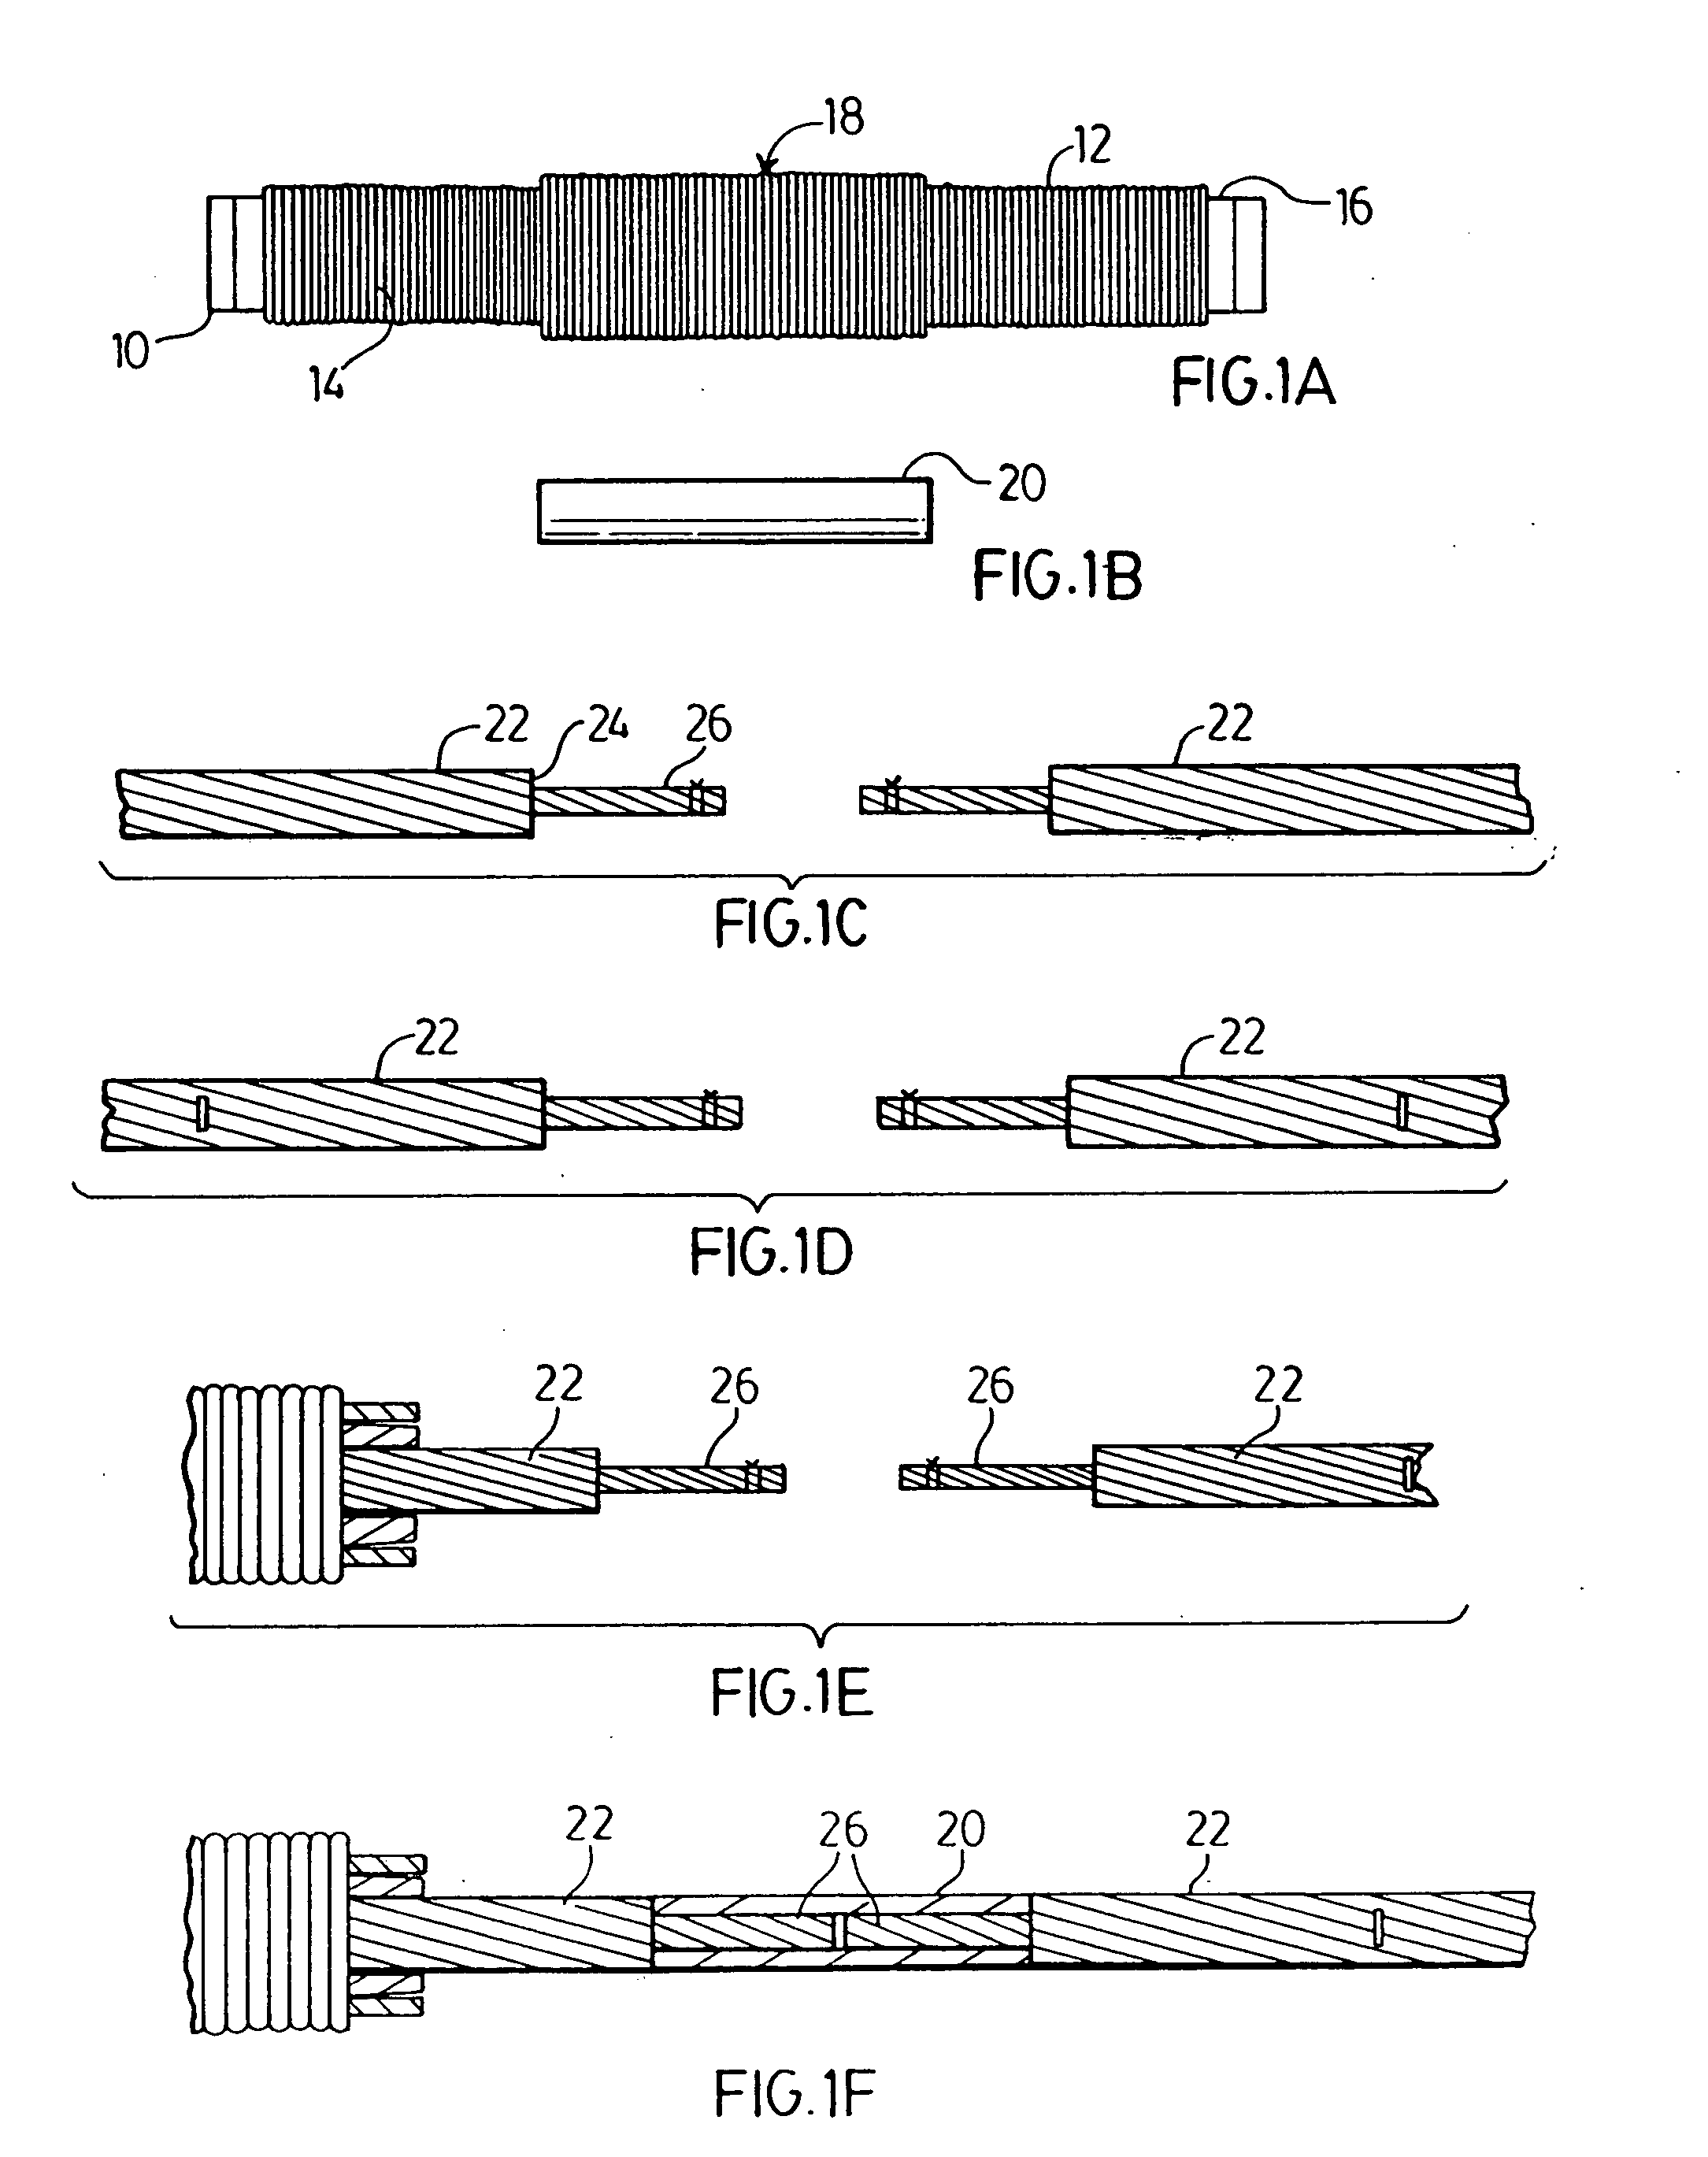 Method and apparatus for joining ends of wires and the like